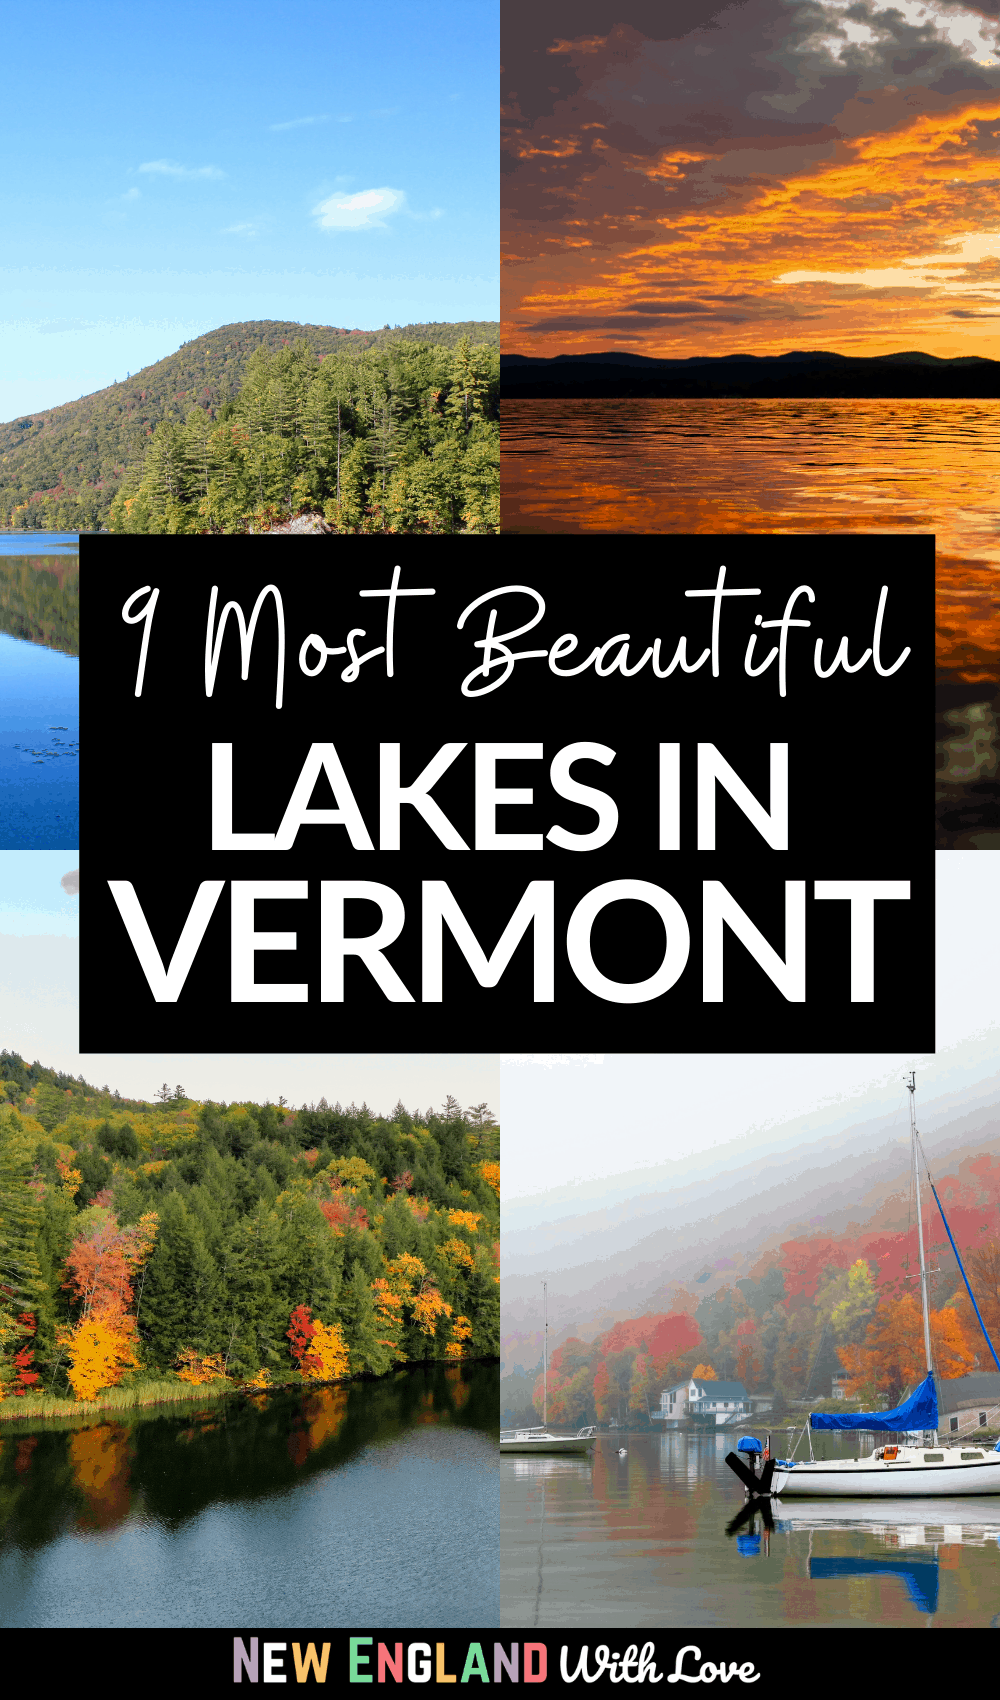 Pinterest graphic reading "9 Most Beautiful LAKES IN VERMONT"